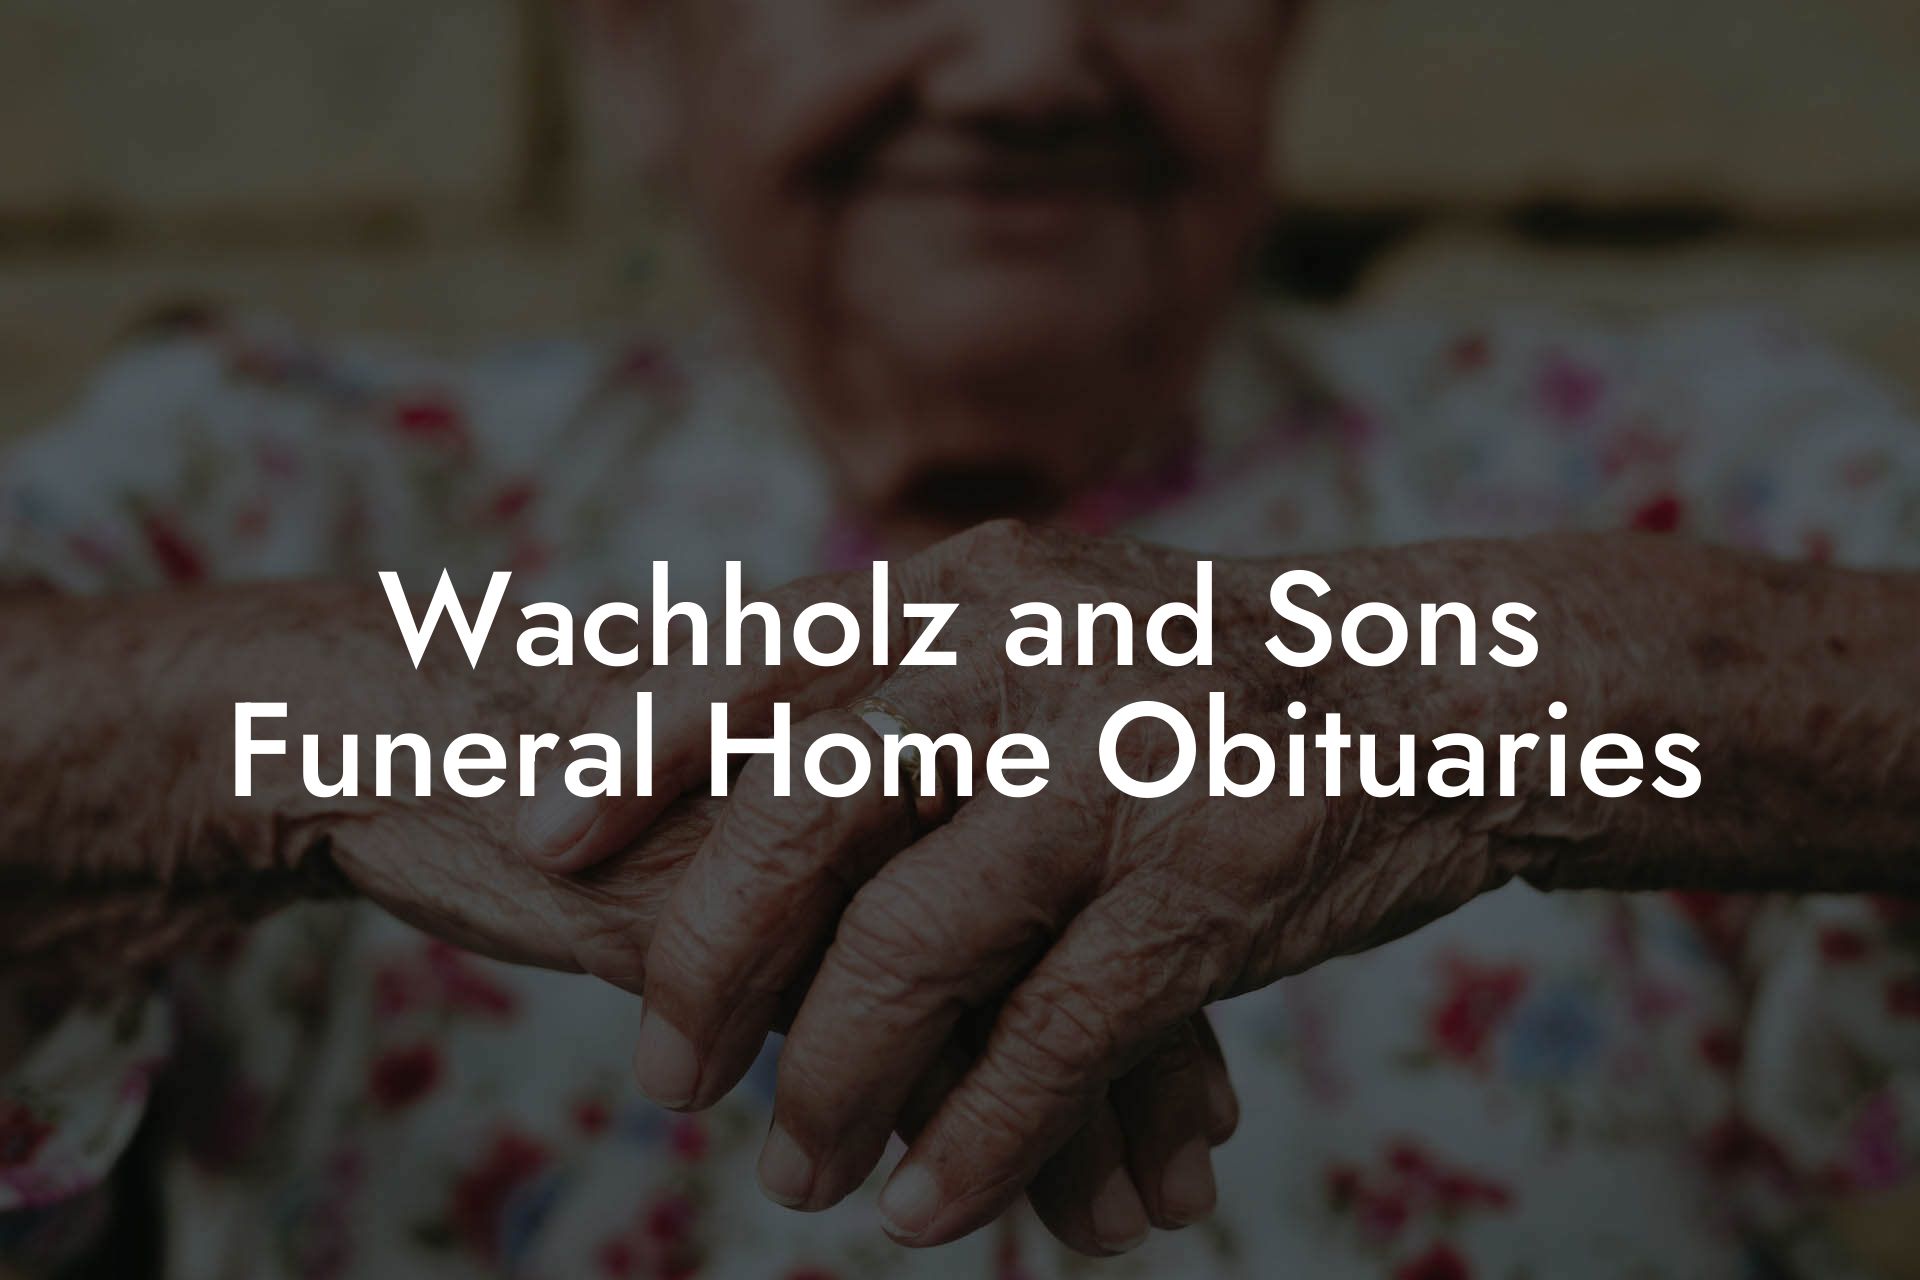 Wachholz and Sons Funeral Home Obituaries